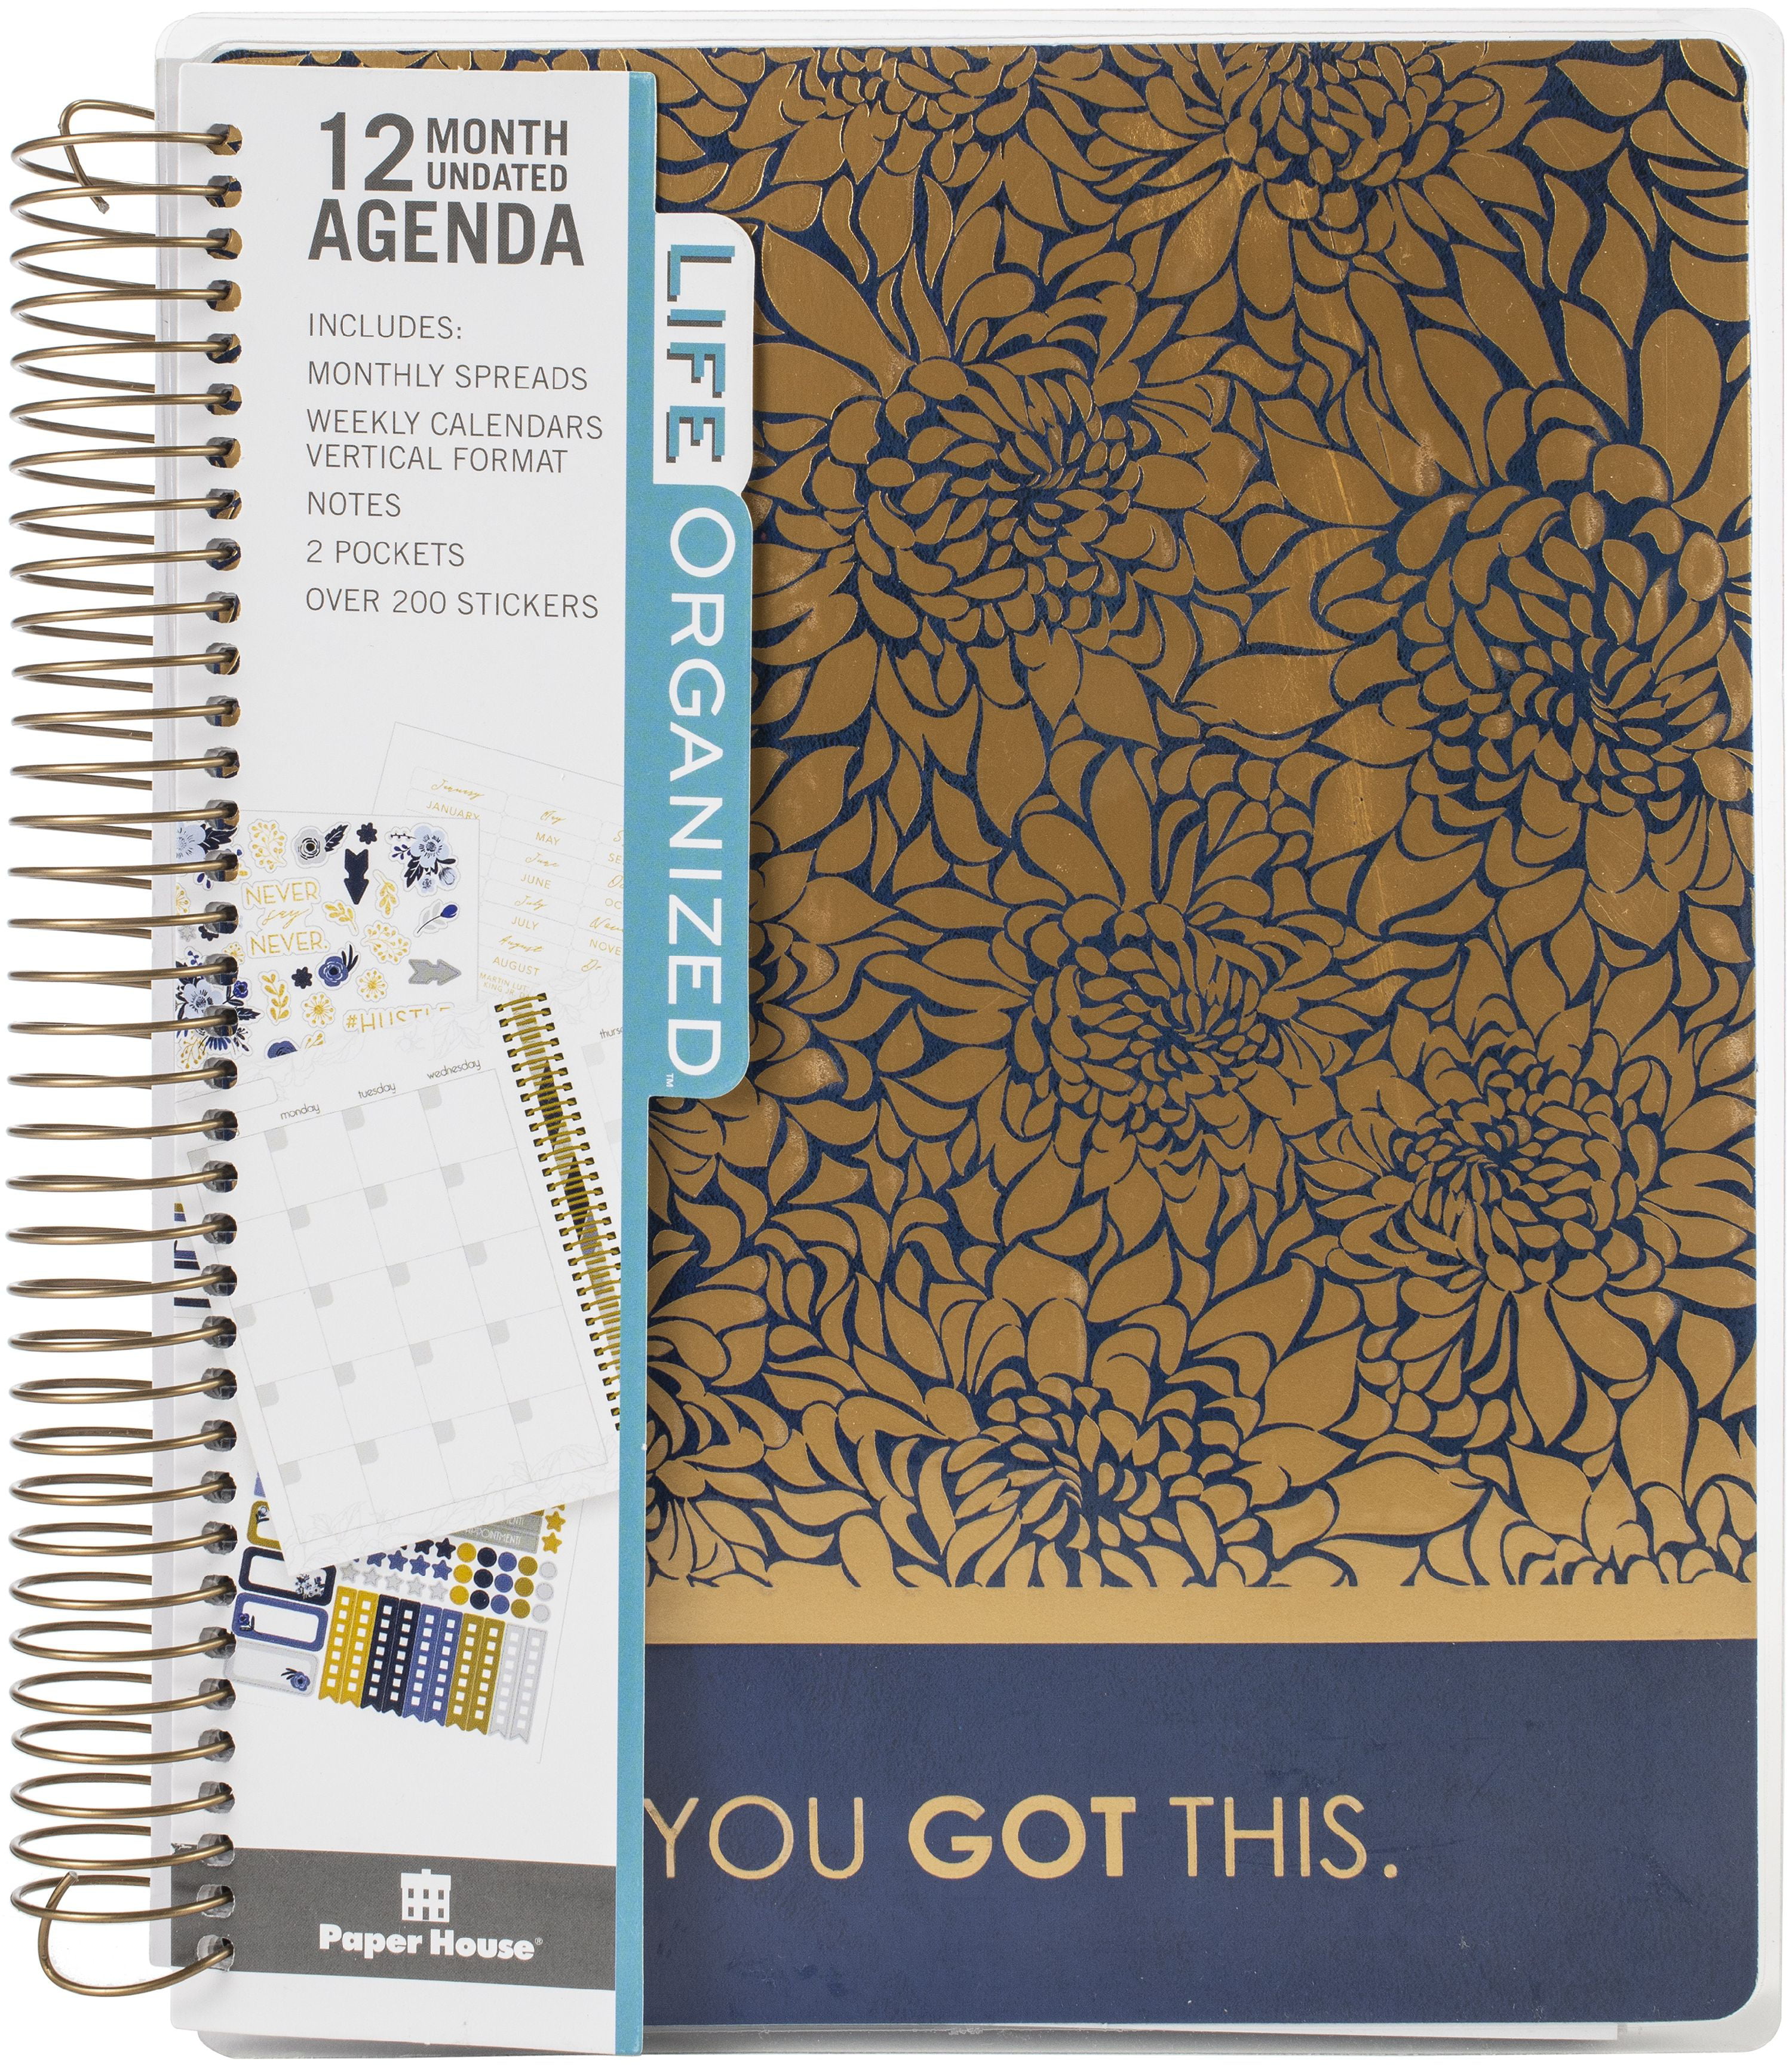 Details about   Paper House 18 Month Planner Undated New